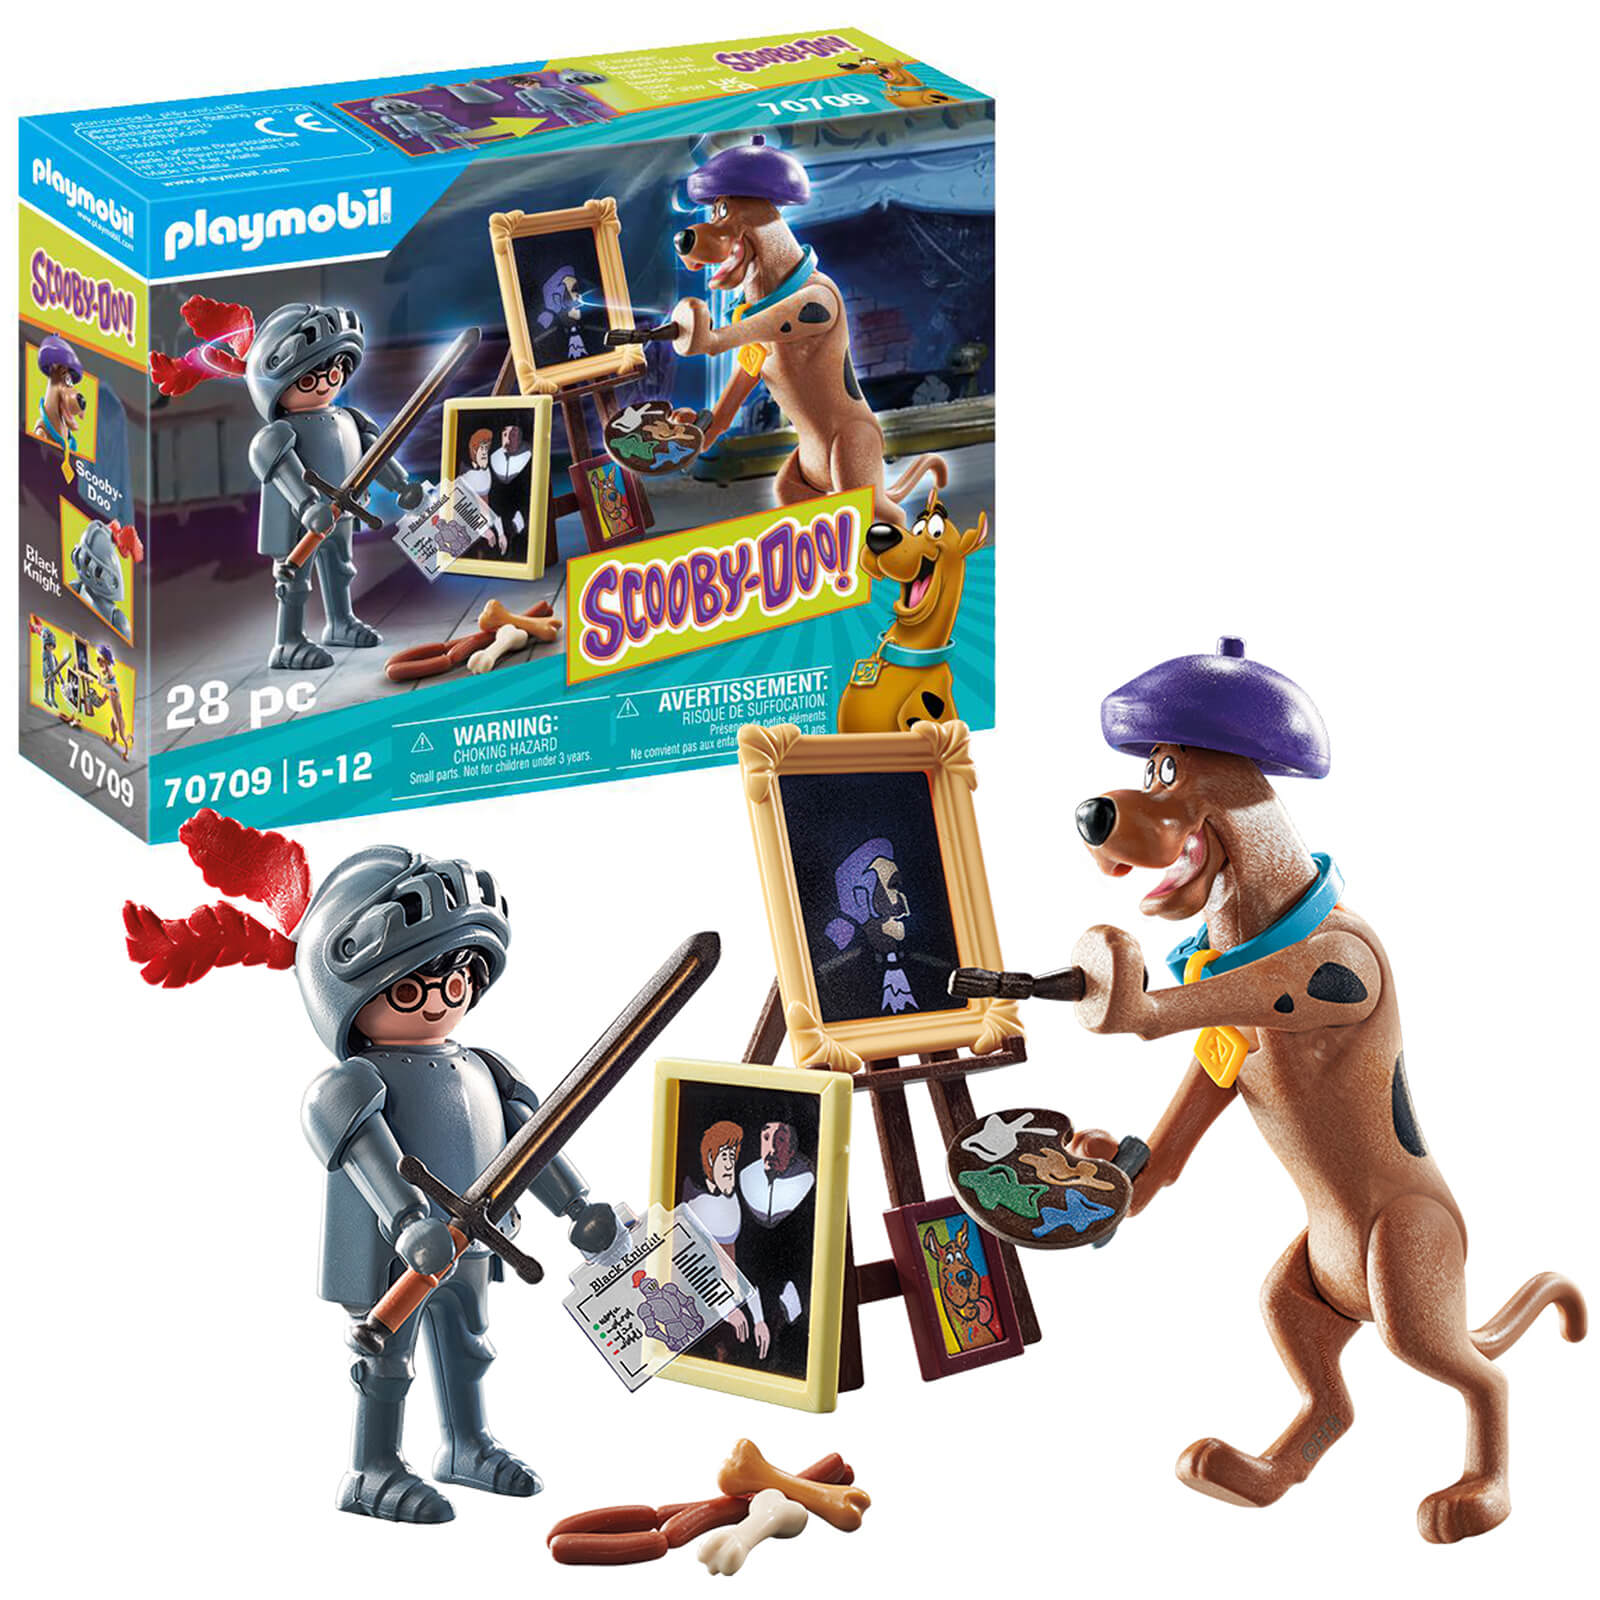 Playmobil SCOOBY DOO! Adventure With Black Knight (70709)